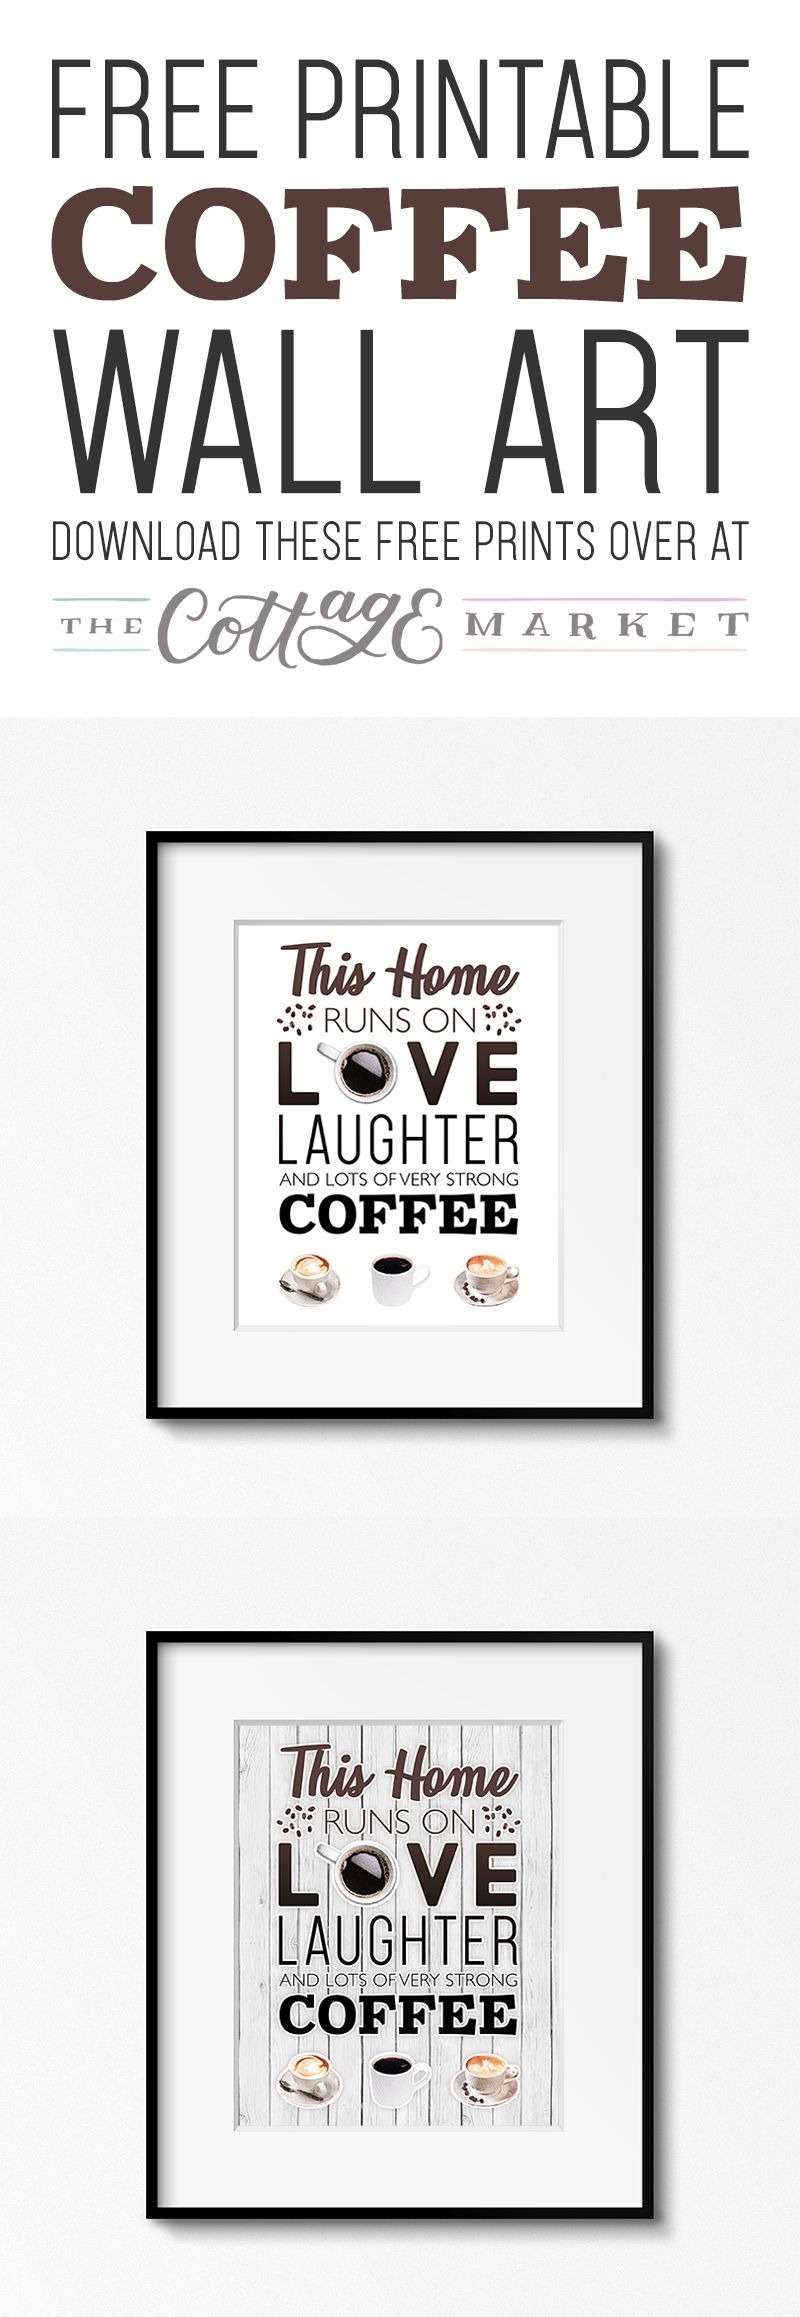 Free Printable Coffee Wall Art The Cottage Market Coffee Wall Art Free Printable Wall Art Kitchen Wall Art Printables - Free Coffee Printable Art